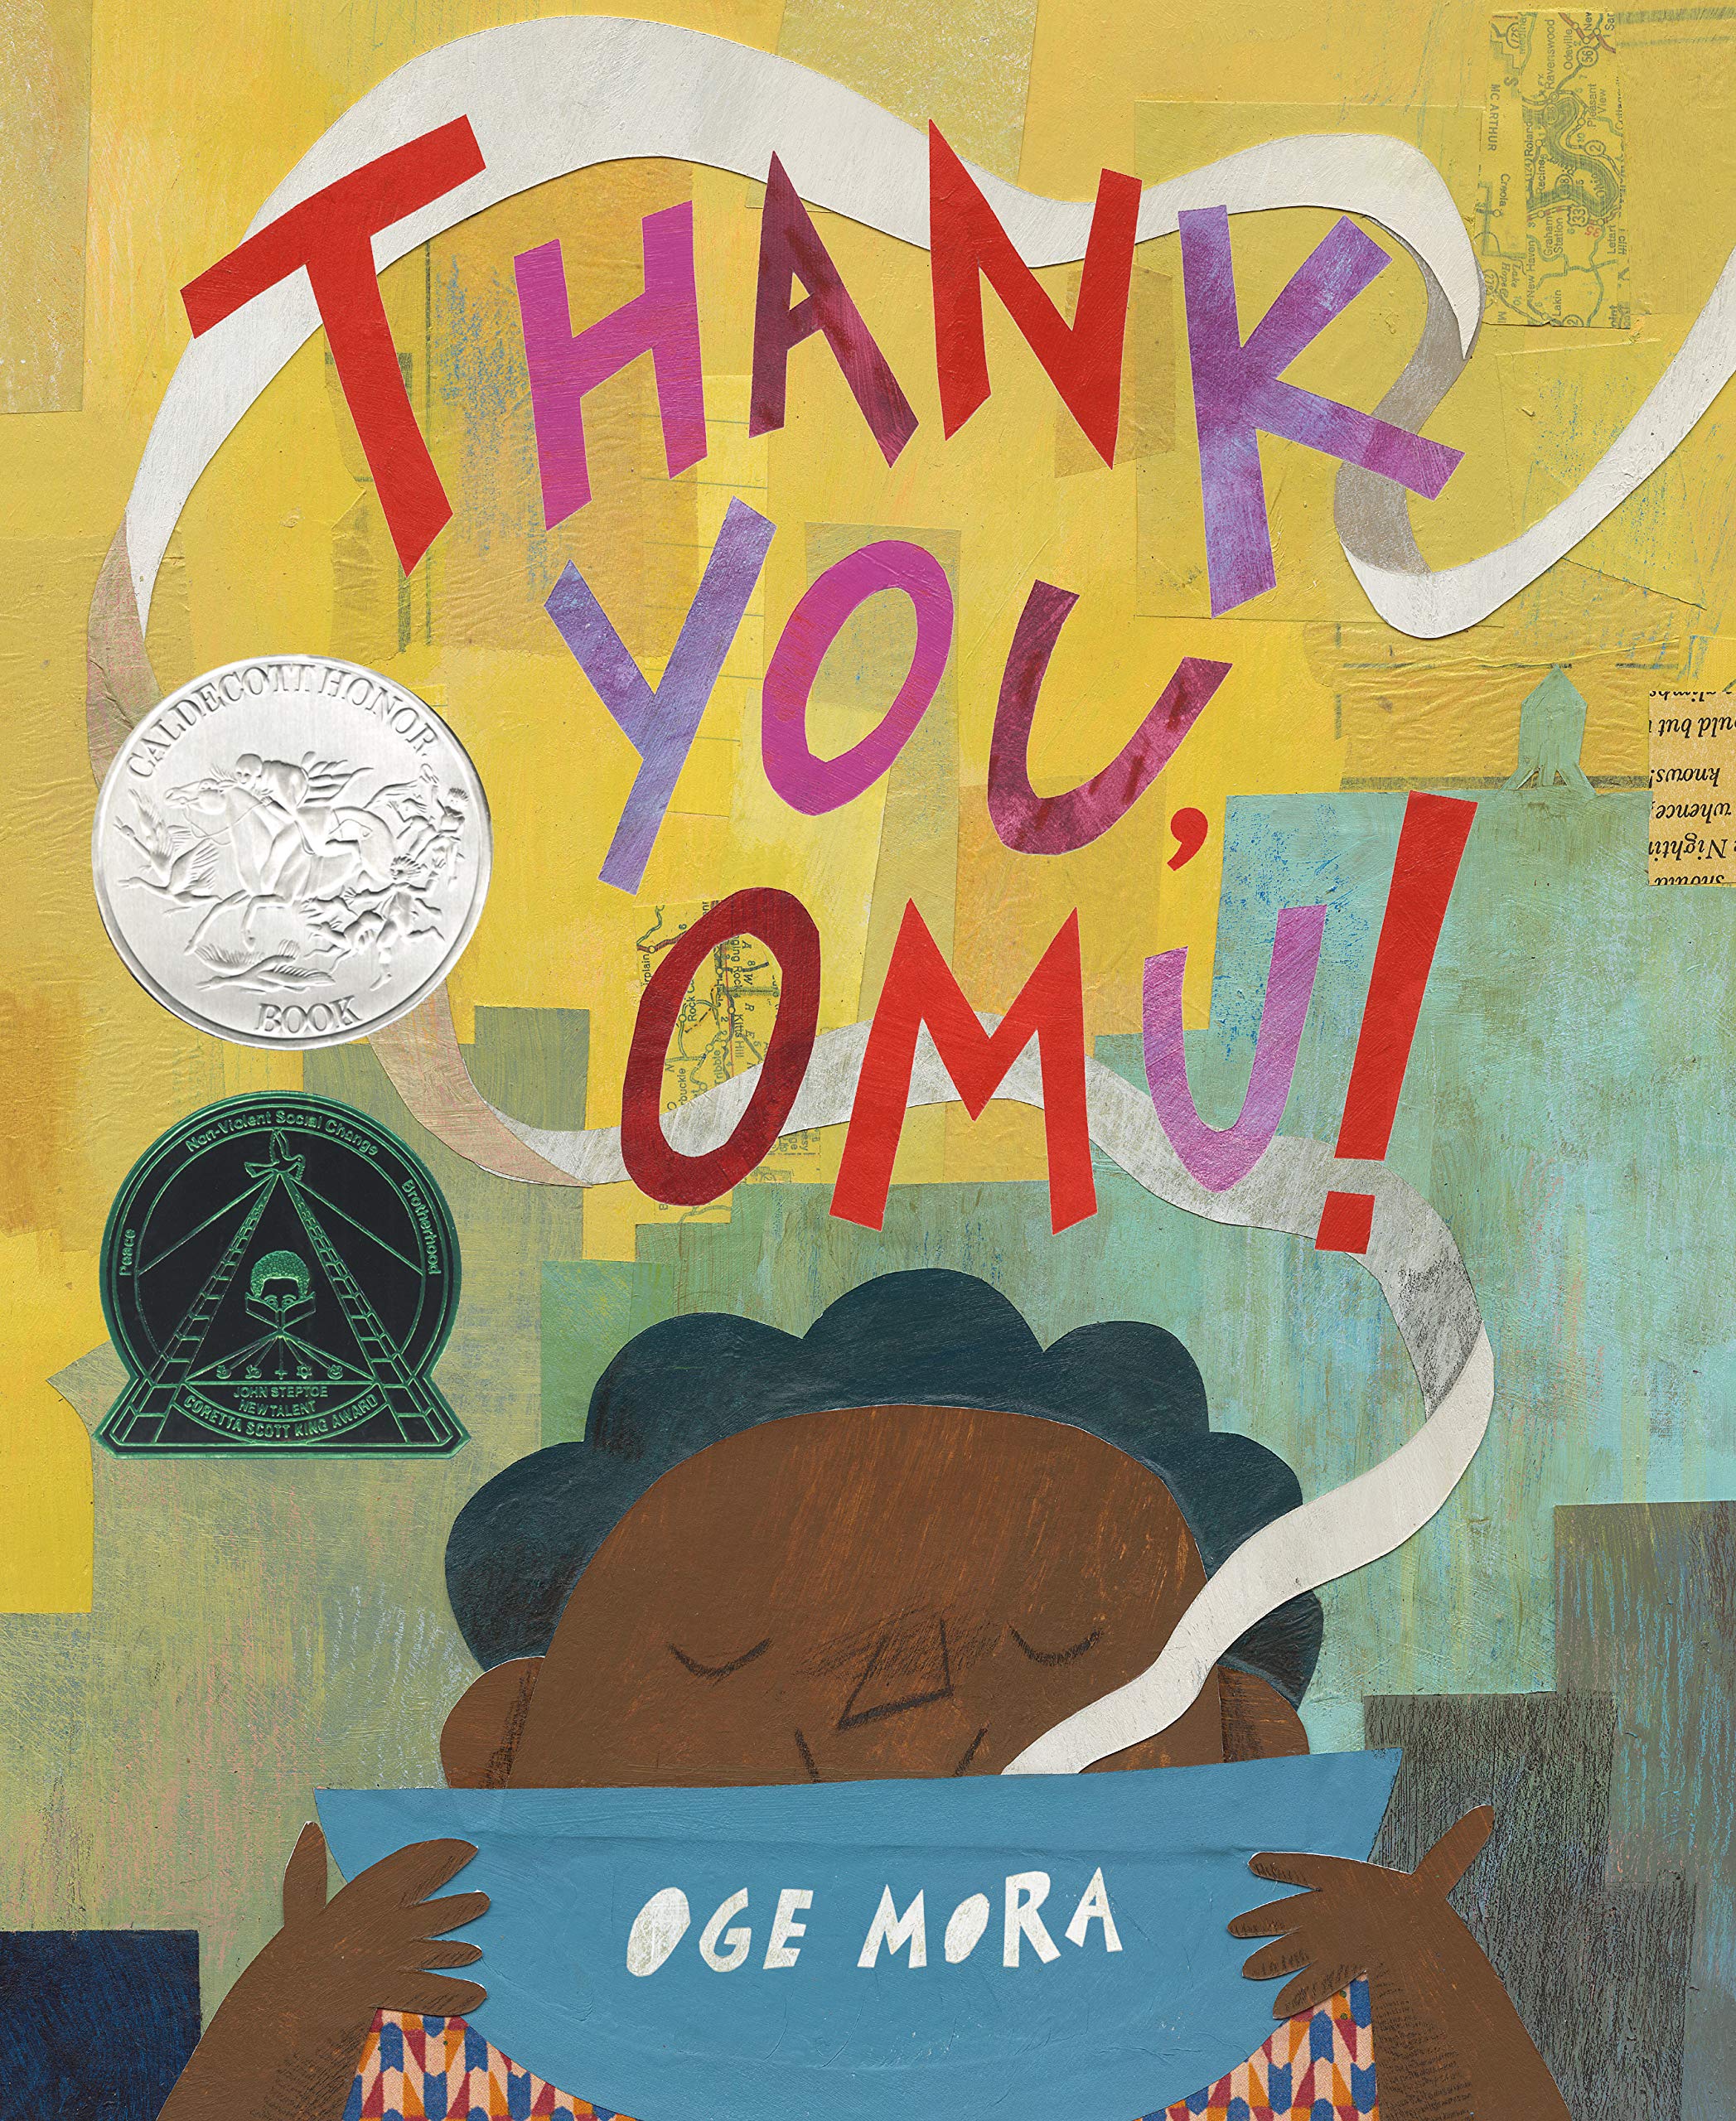 Read for the Record: Thank You, Omu!